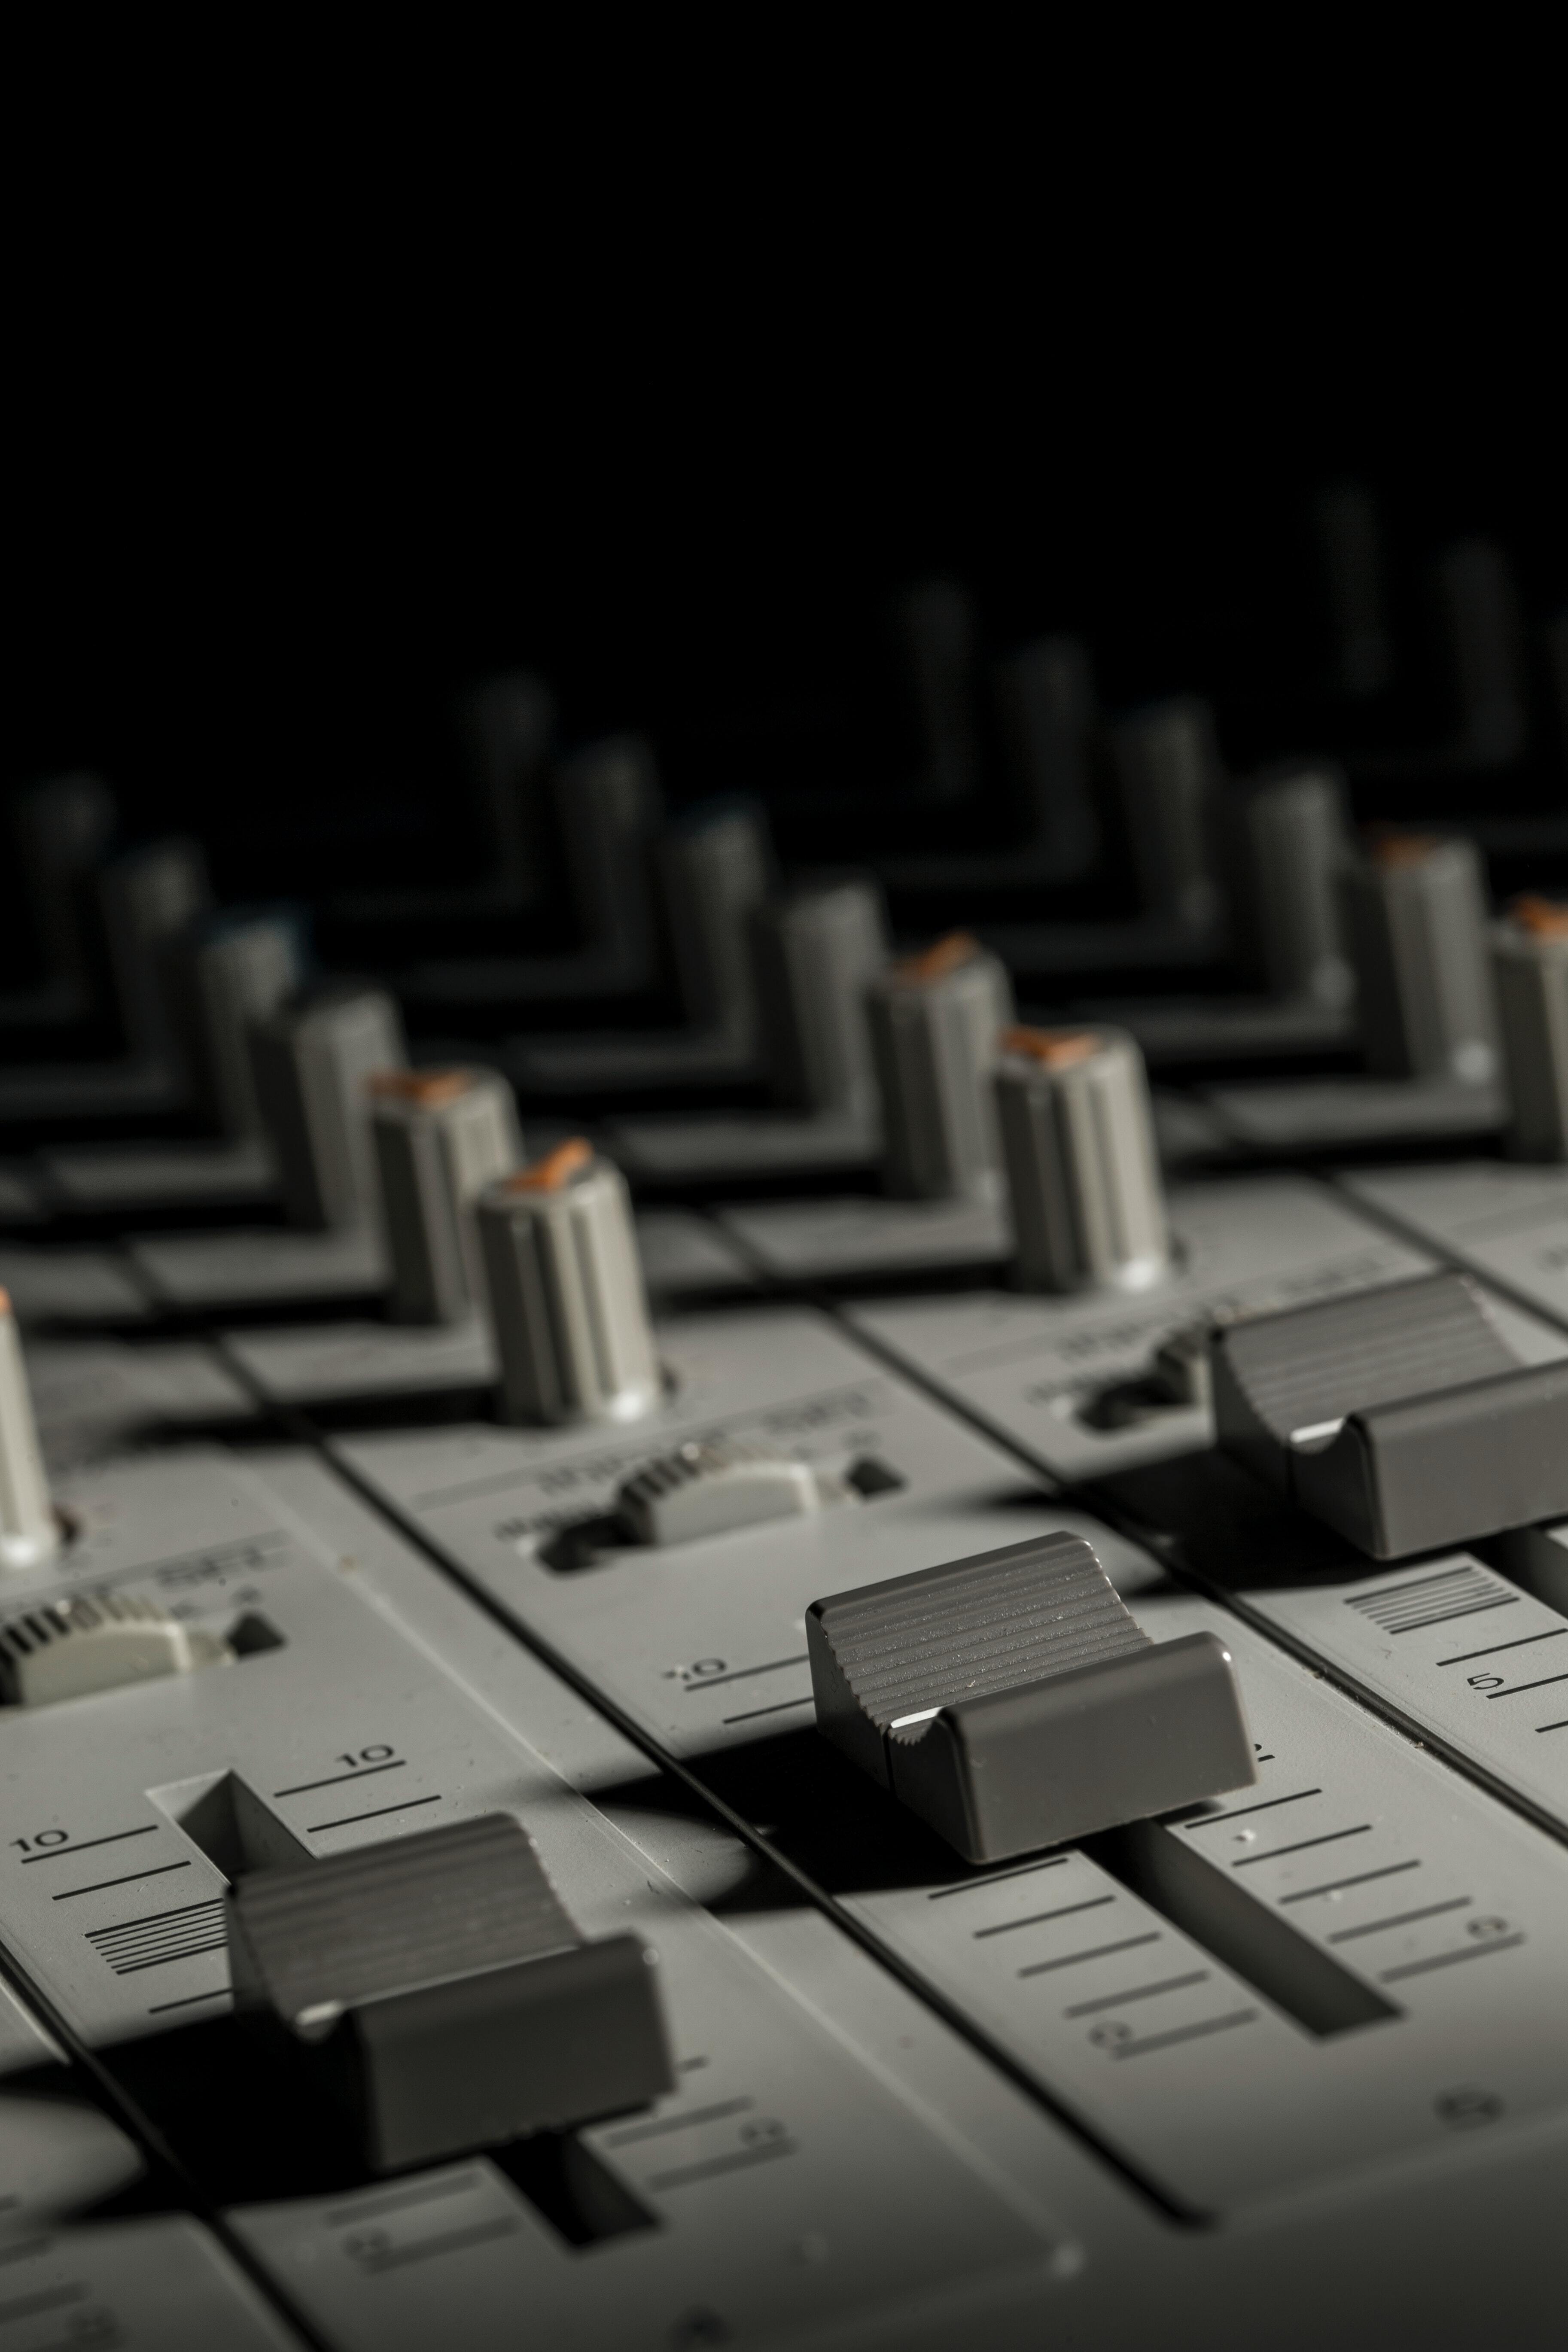 View Image Details Faders Fade